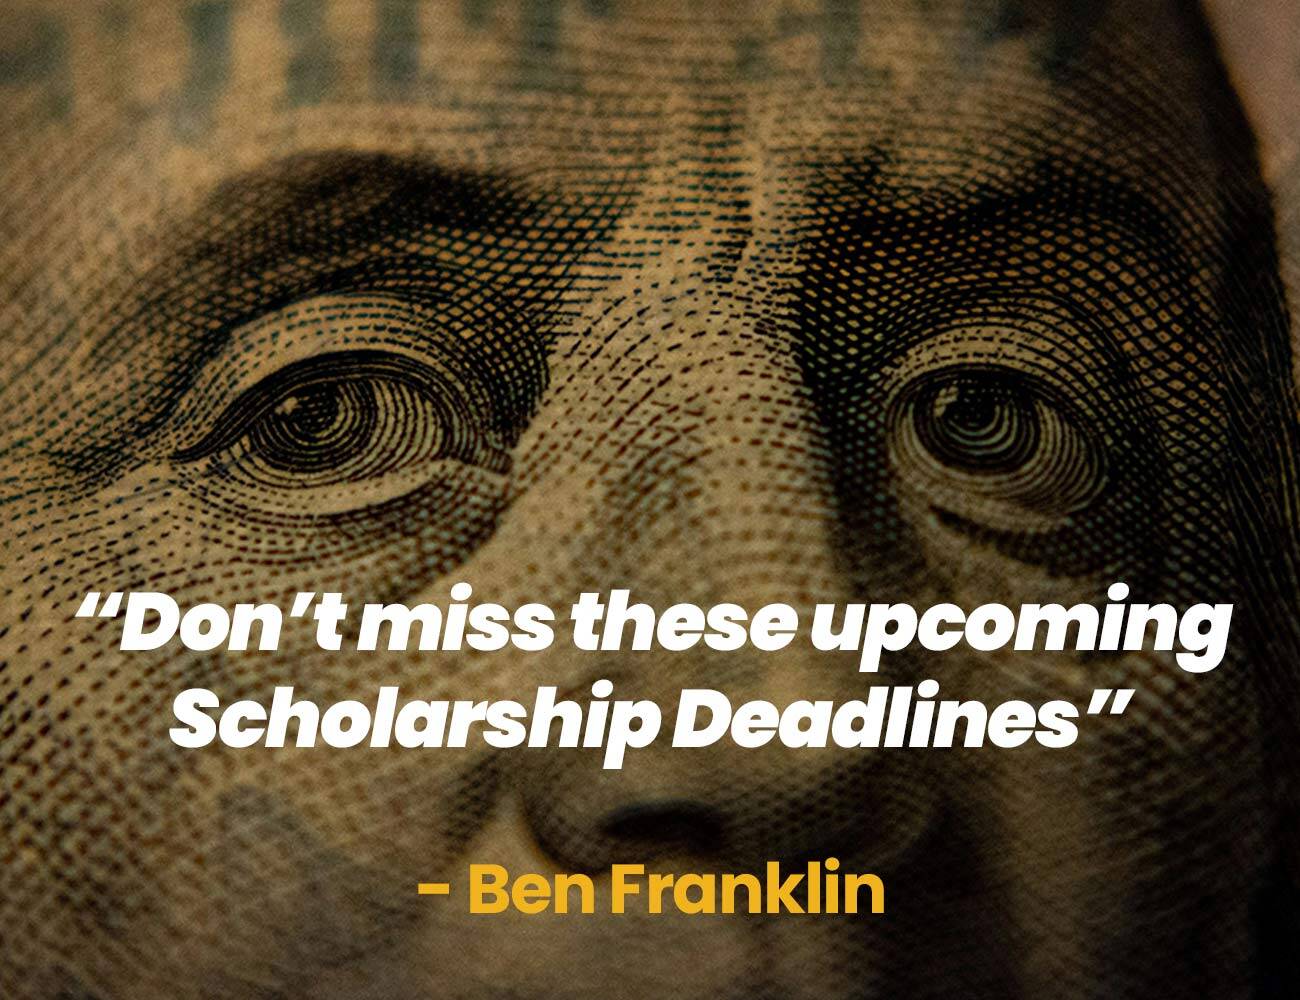 Don't miss these upcoming scholarship deadlines